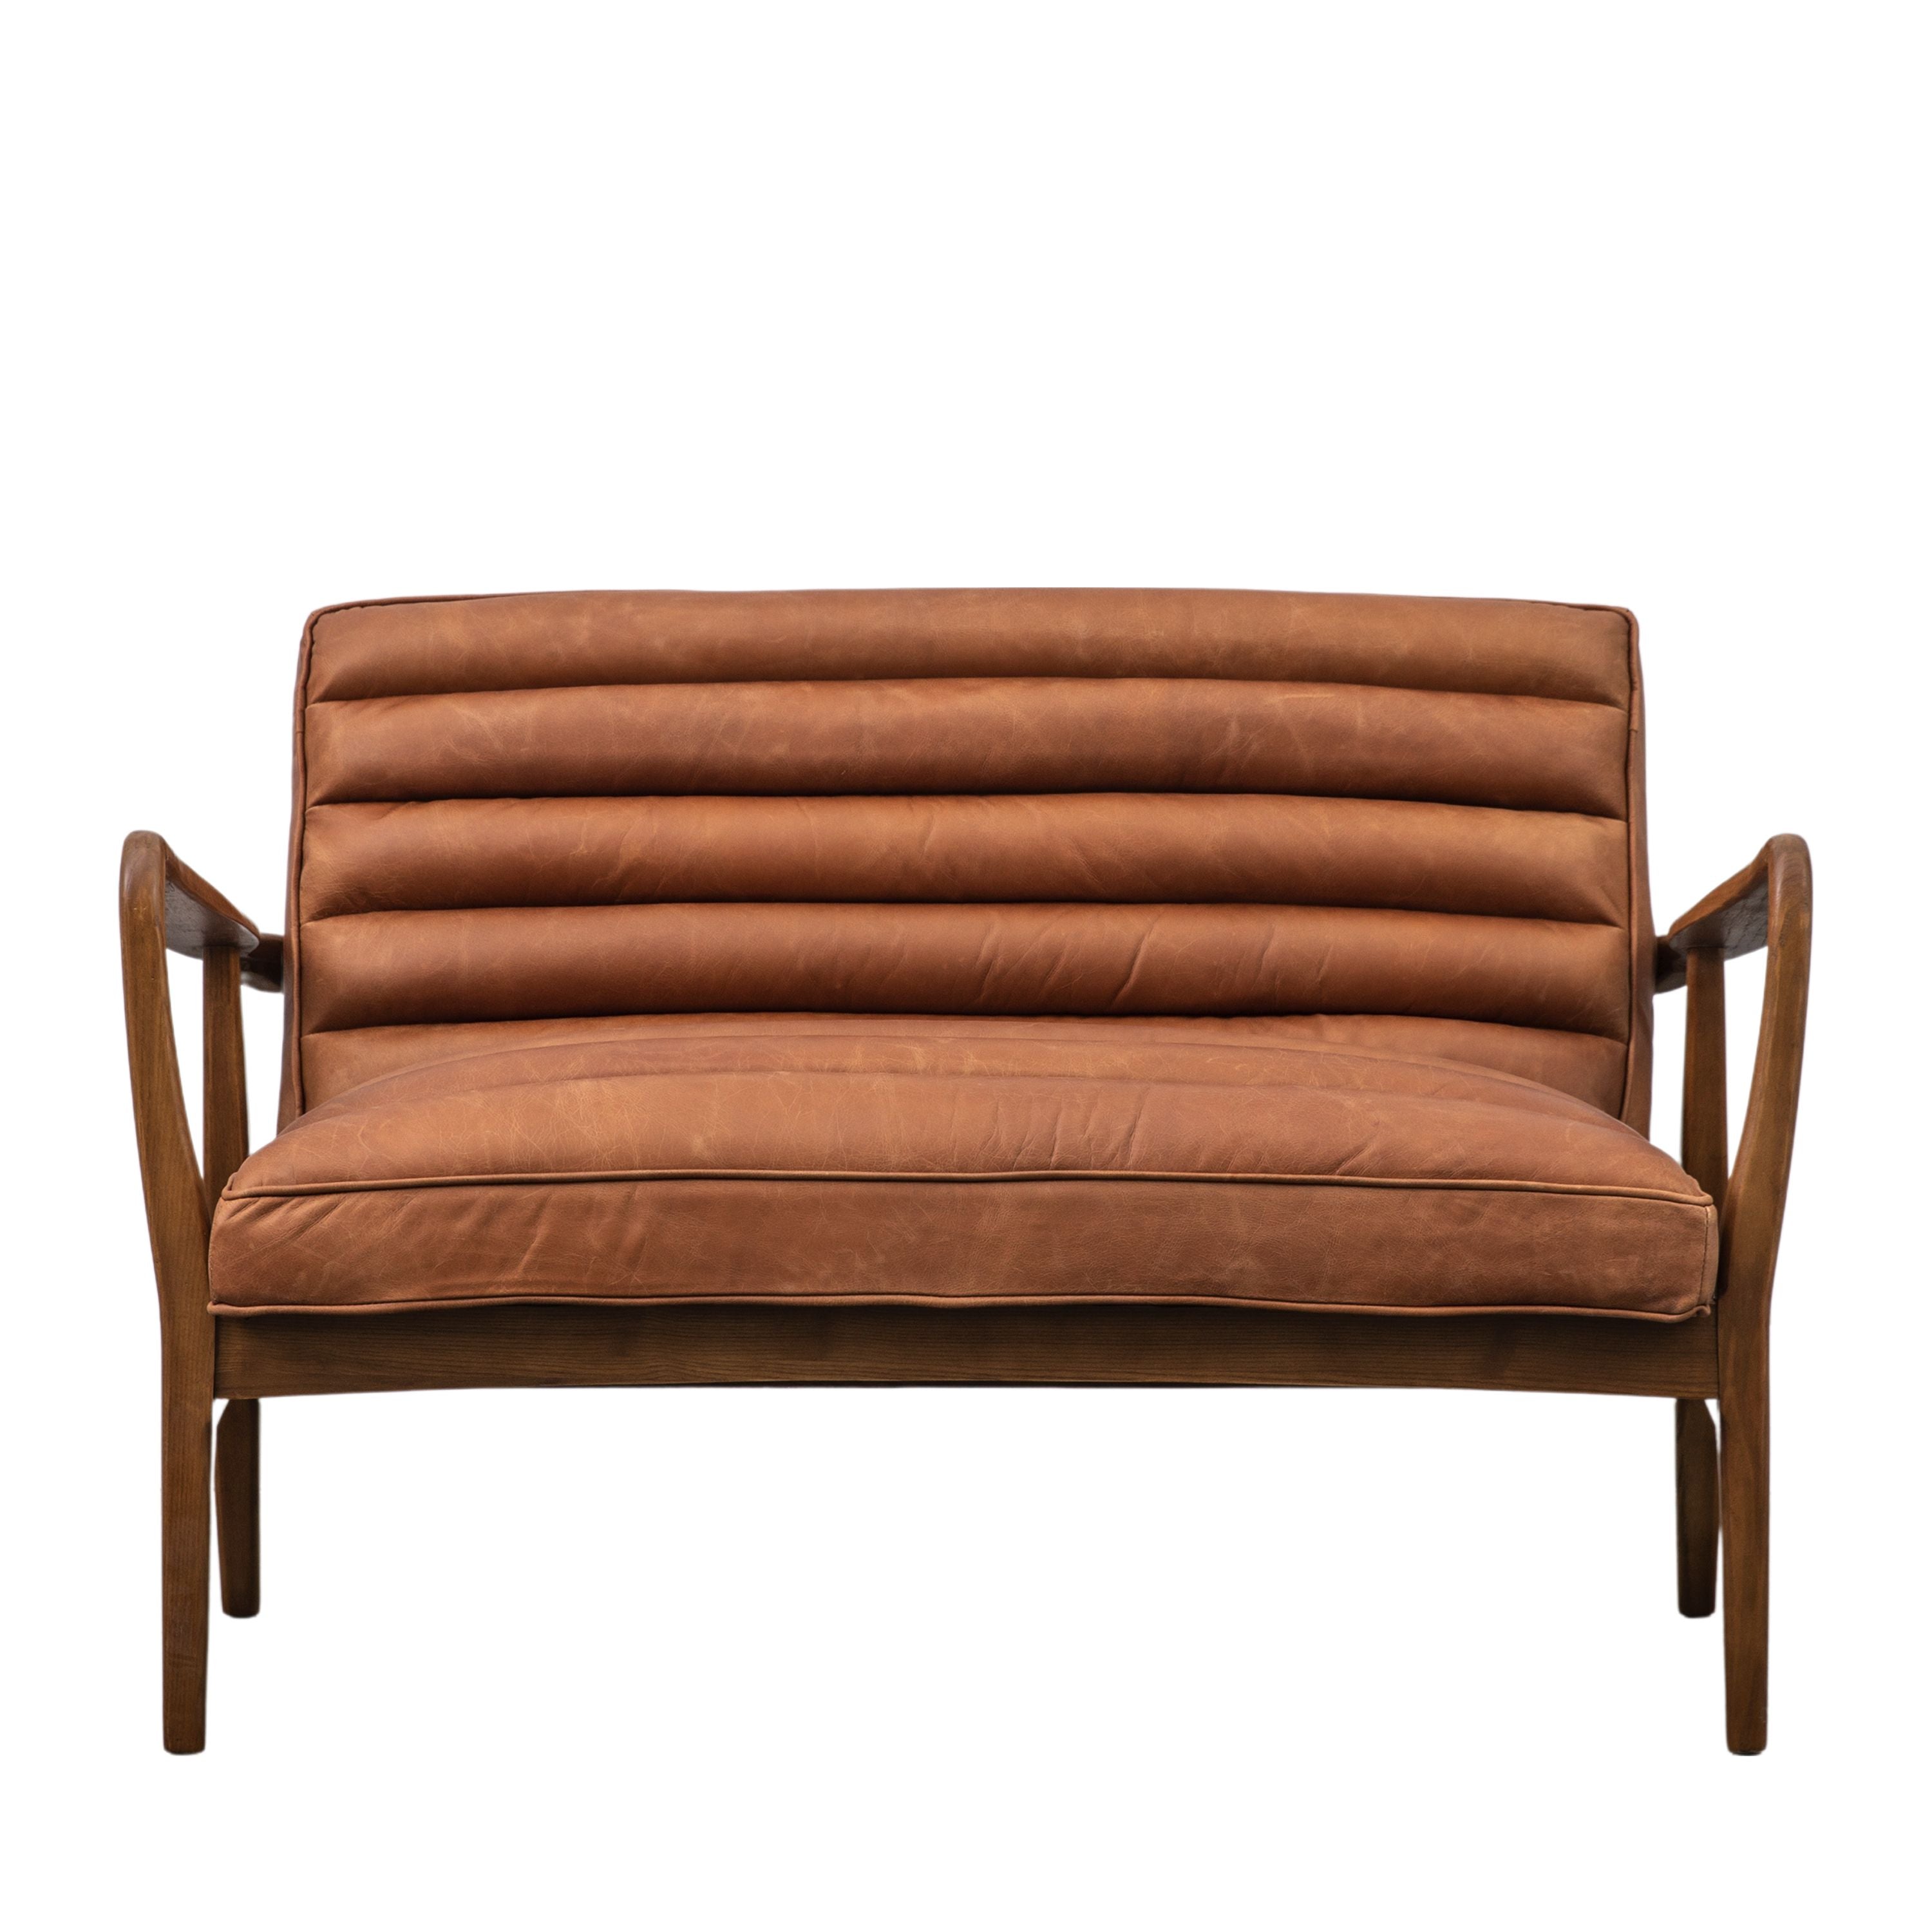 Cruzo 2 Seater Sofa Vintage Brown Leather with Wooden Legs - Maison Rêves UK